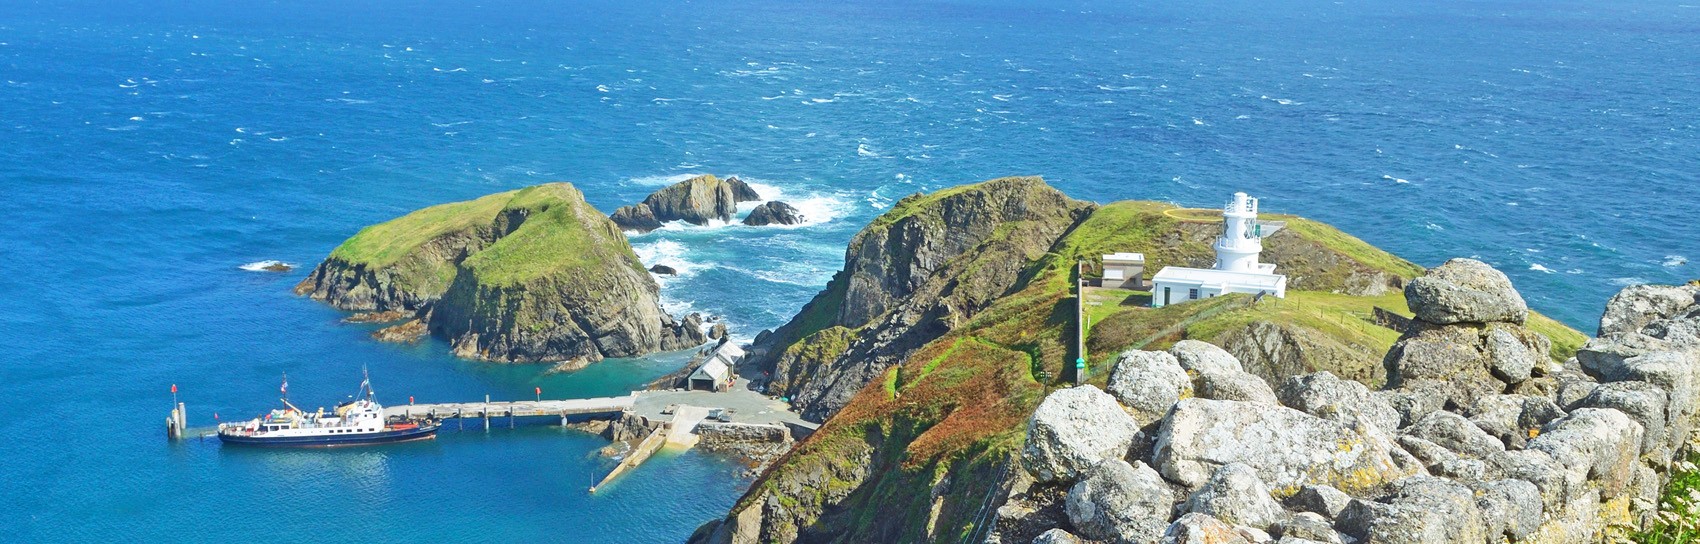 Lundy Island, off the north coast of Devon. Photograph by DIANA MOWER